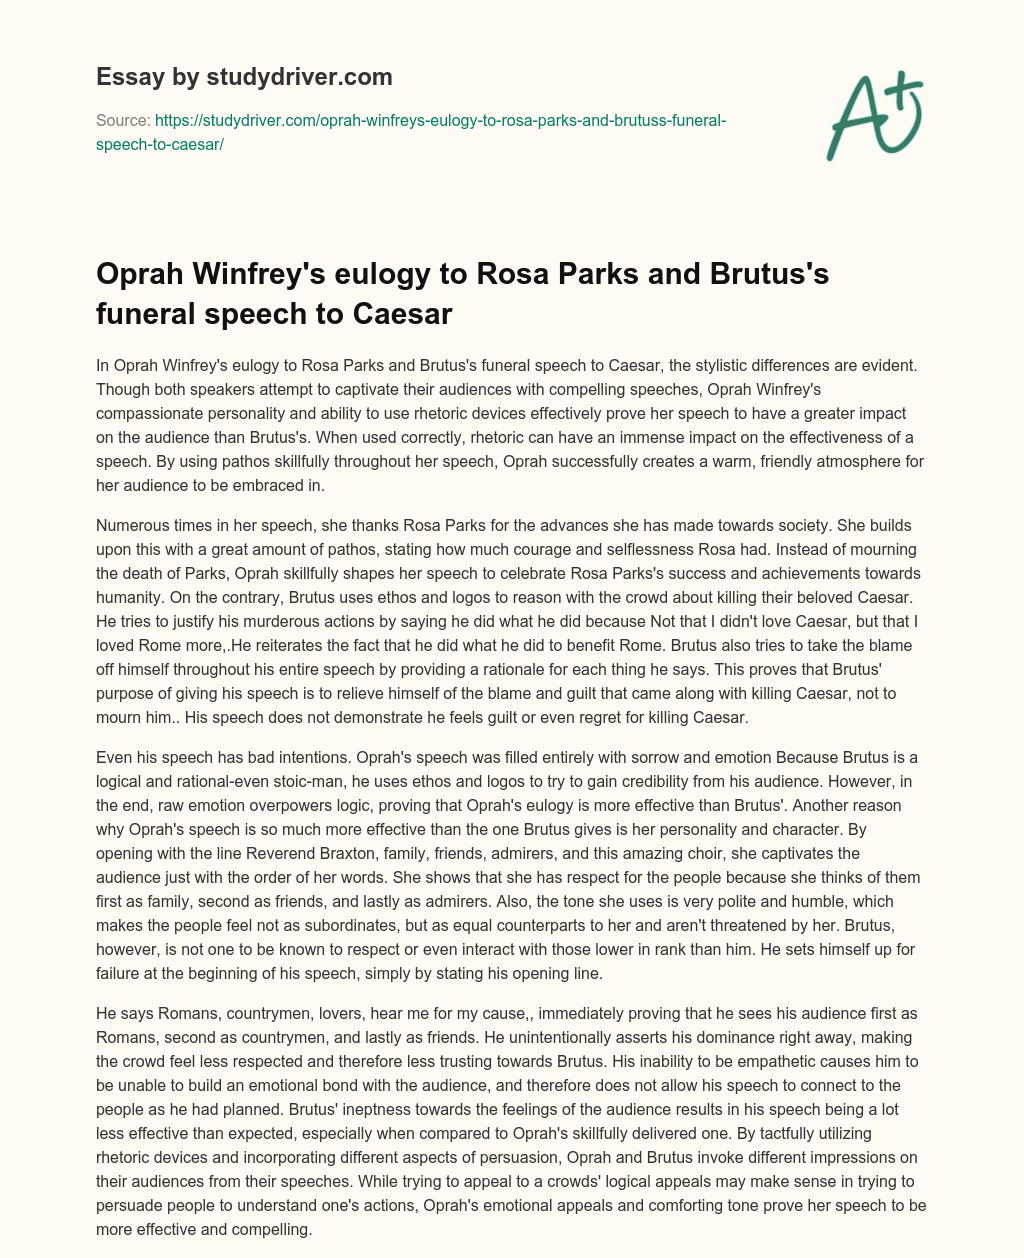 Oprah Winfrey’s Eulogy to Rosa Parks and Brutus’s Funeral Speech to Caesar essay